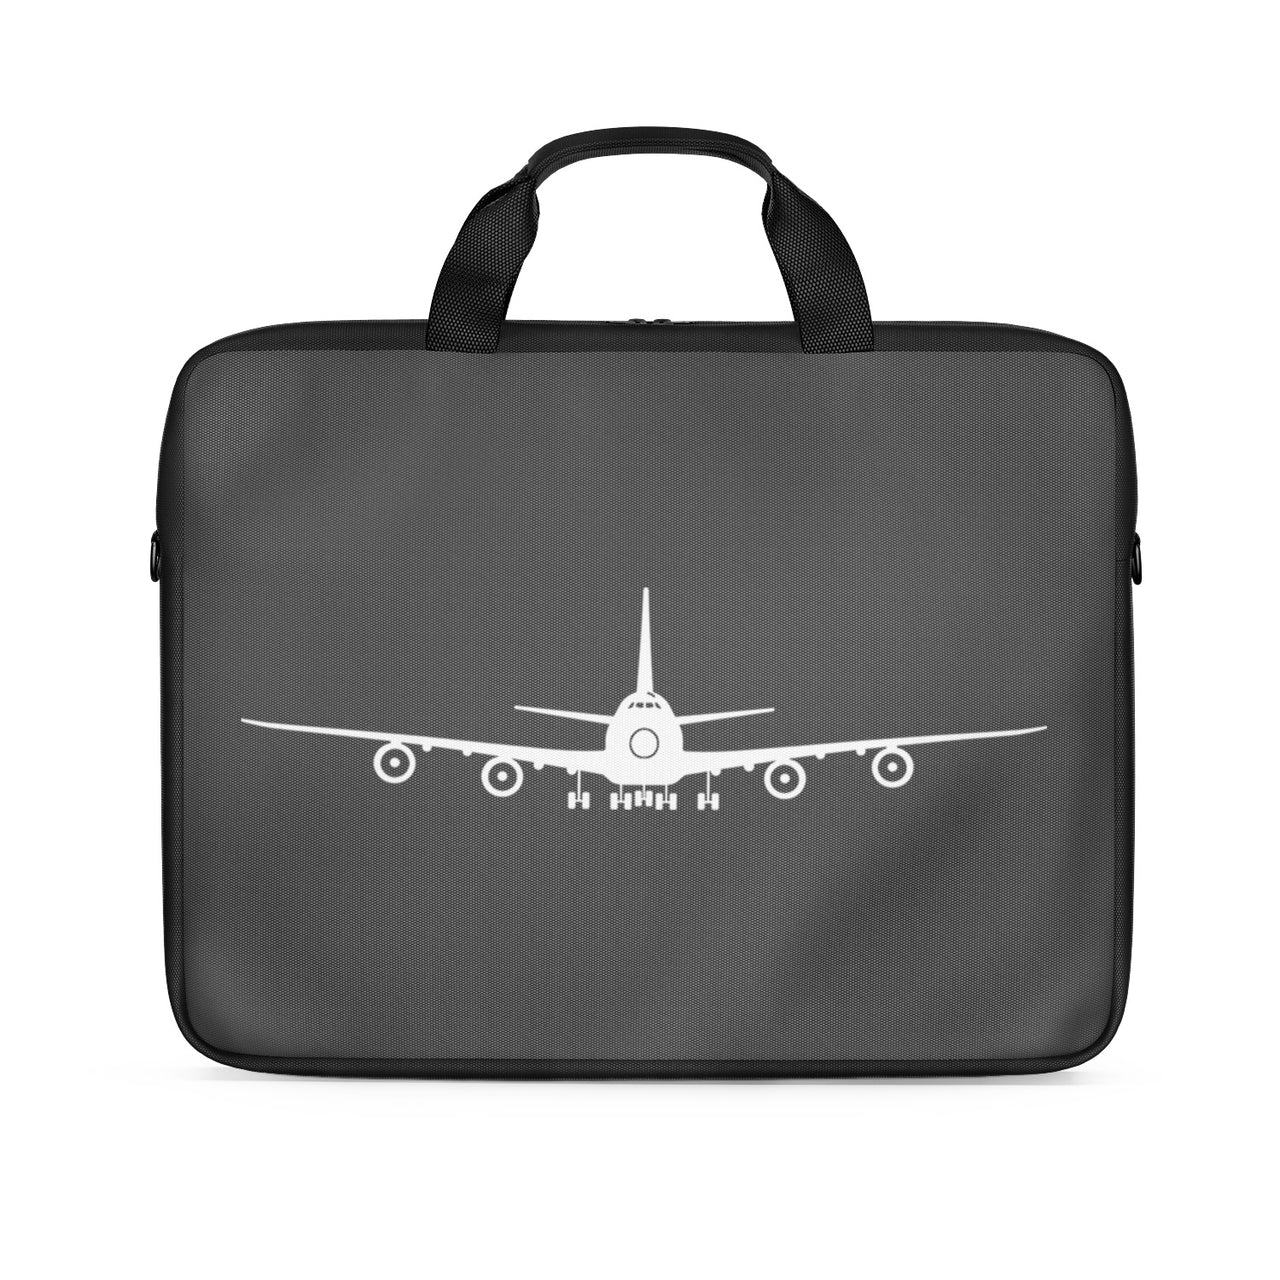 Boeing 747 Silhouette Designed Laptop & Tablet Bags